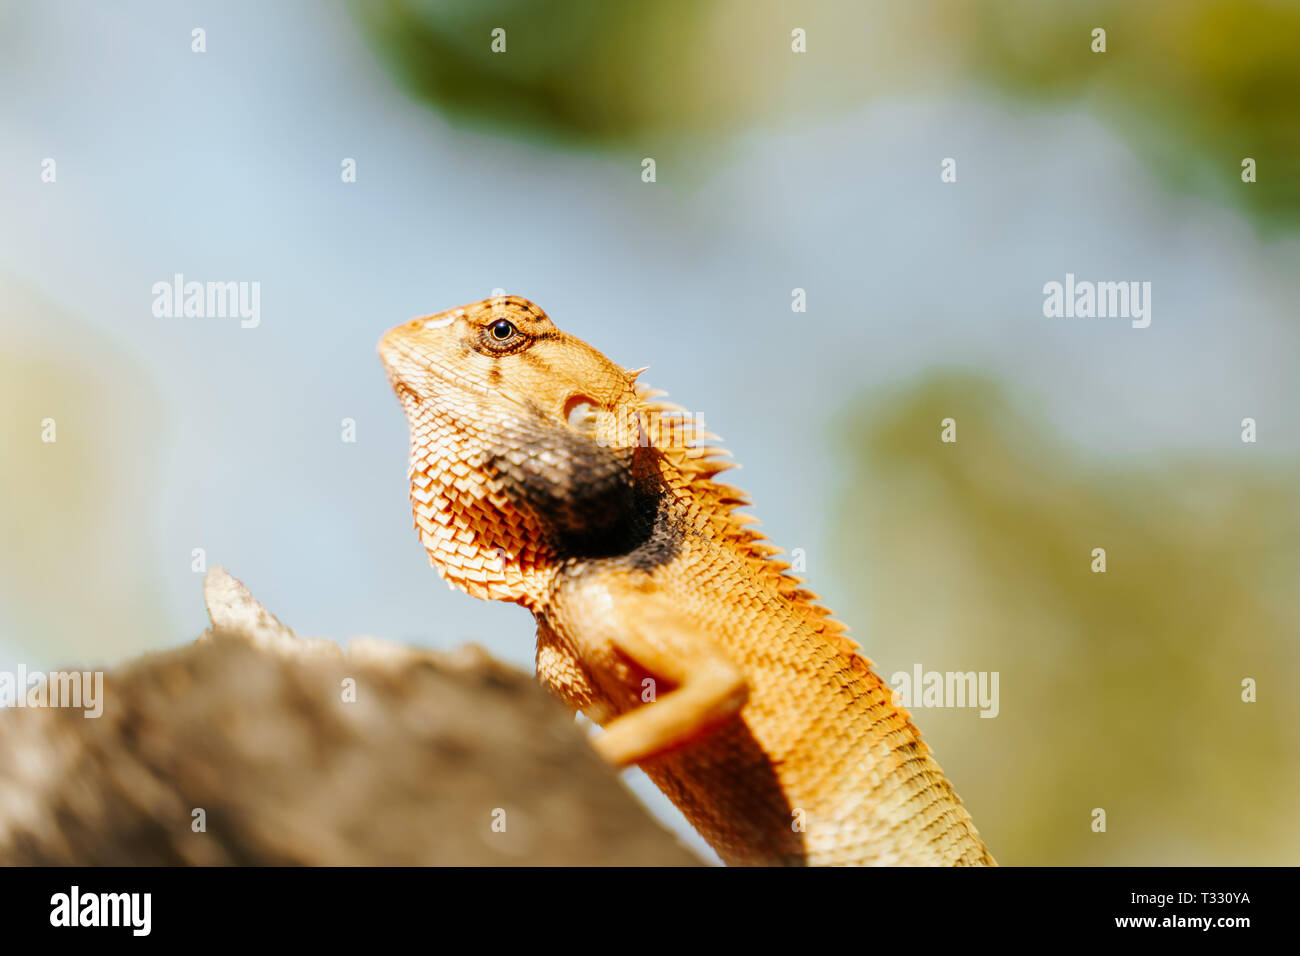 Lizard calotes versicolor sunbathing on the branch of a tree in Koh Tao, Thailand Stock Photo